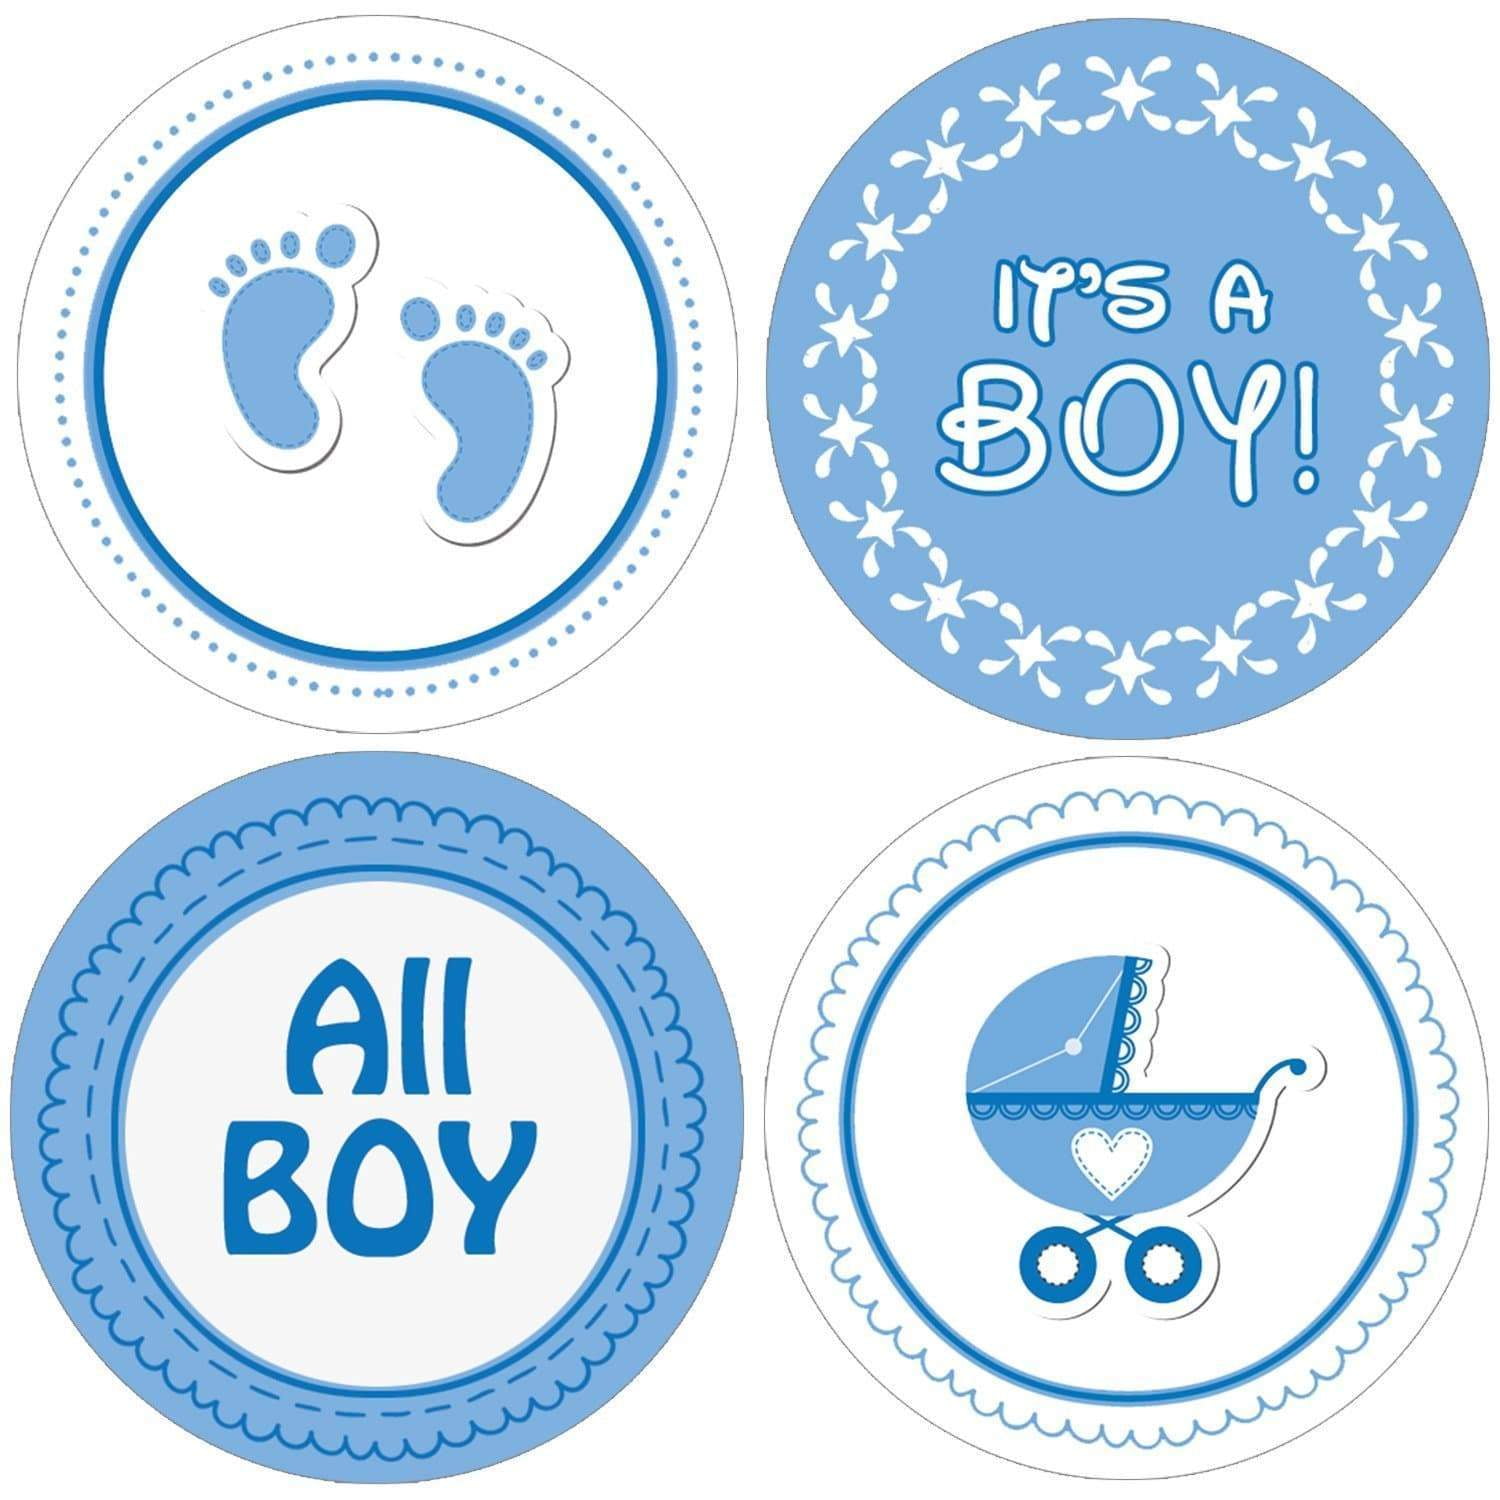 12 x Blue Washing Line Baby shower Bags & IT'S A BOY Stickers Favour Kit 